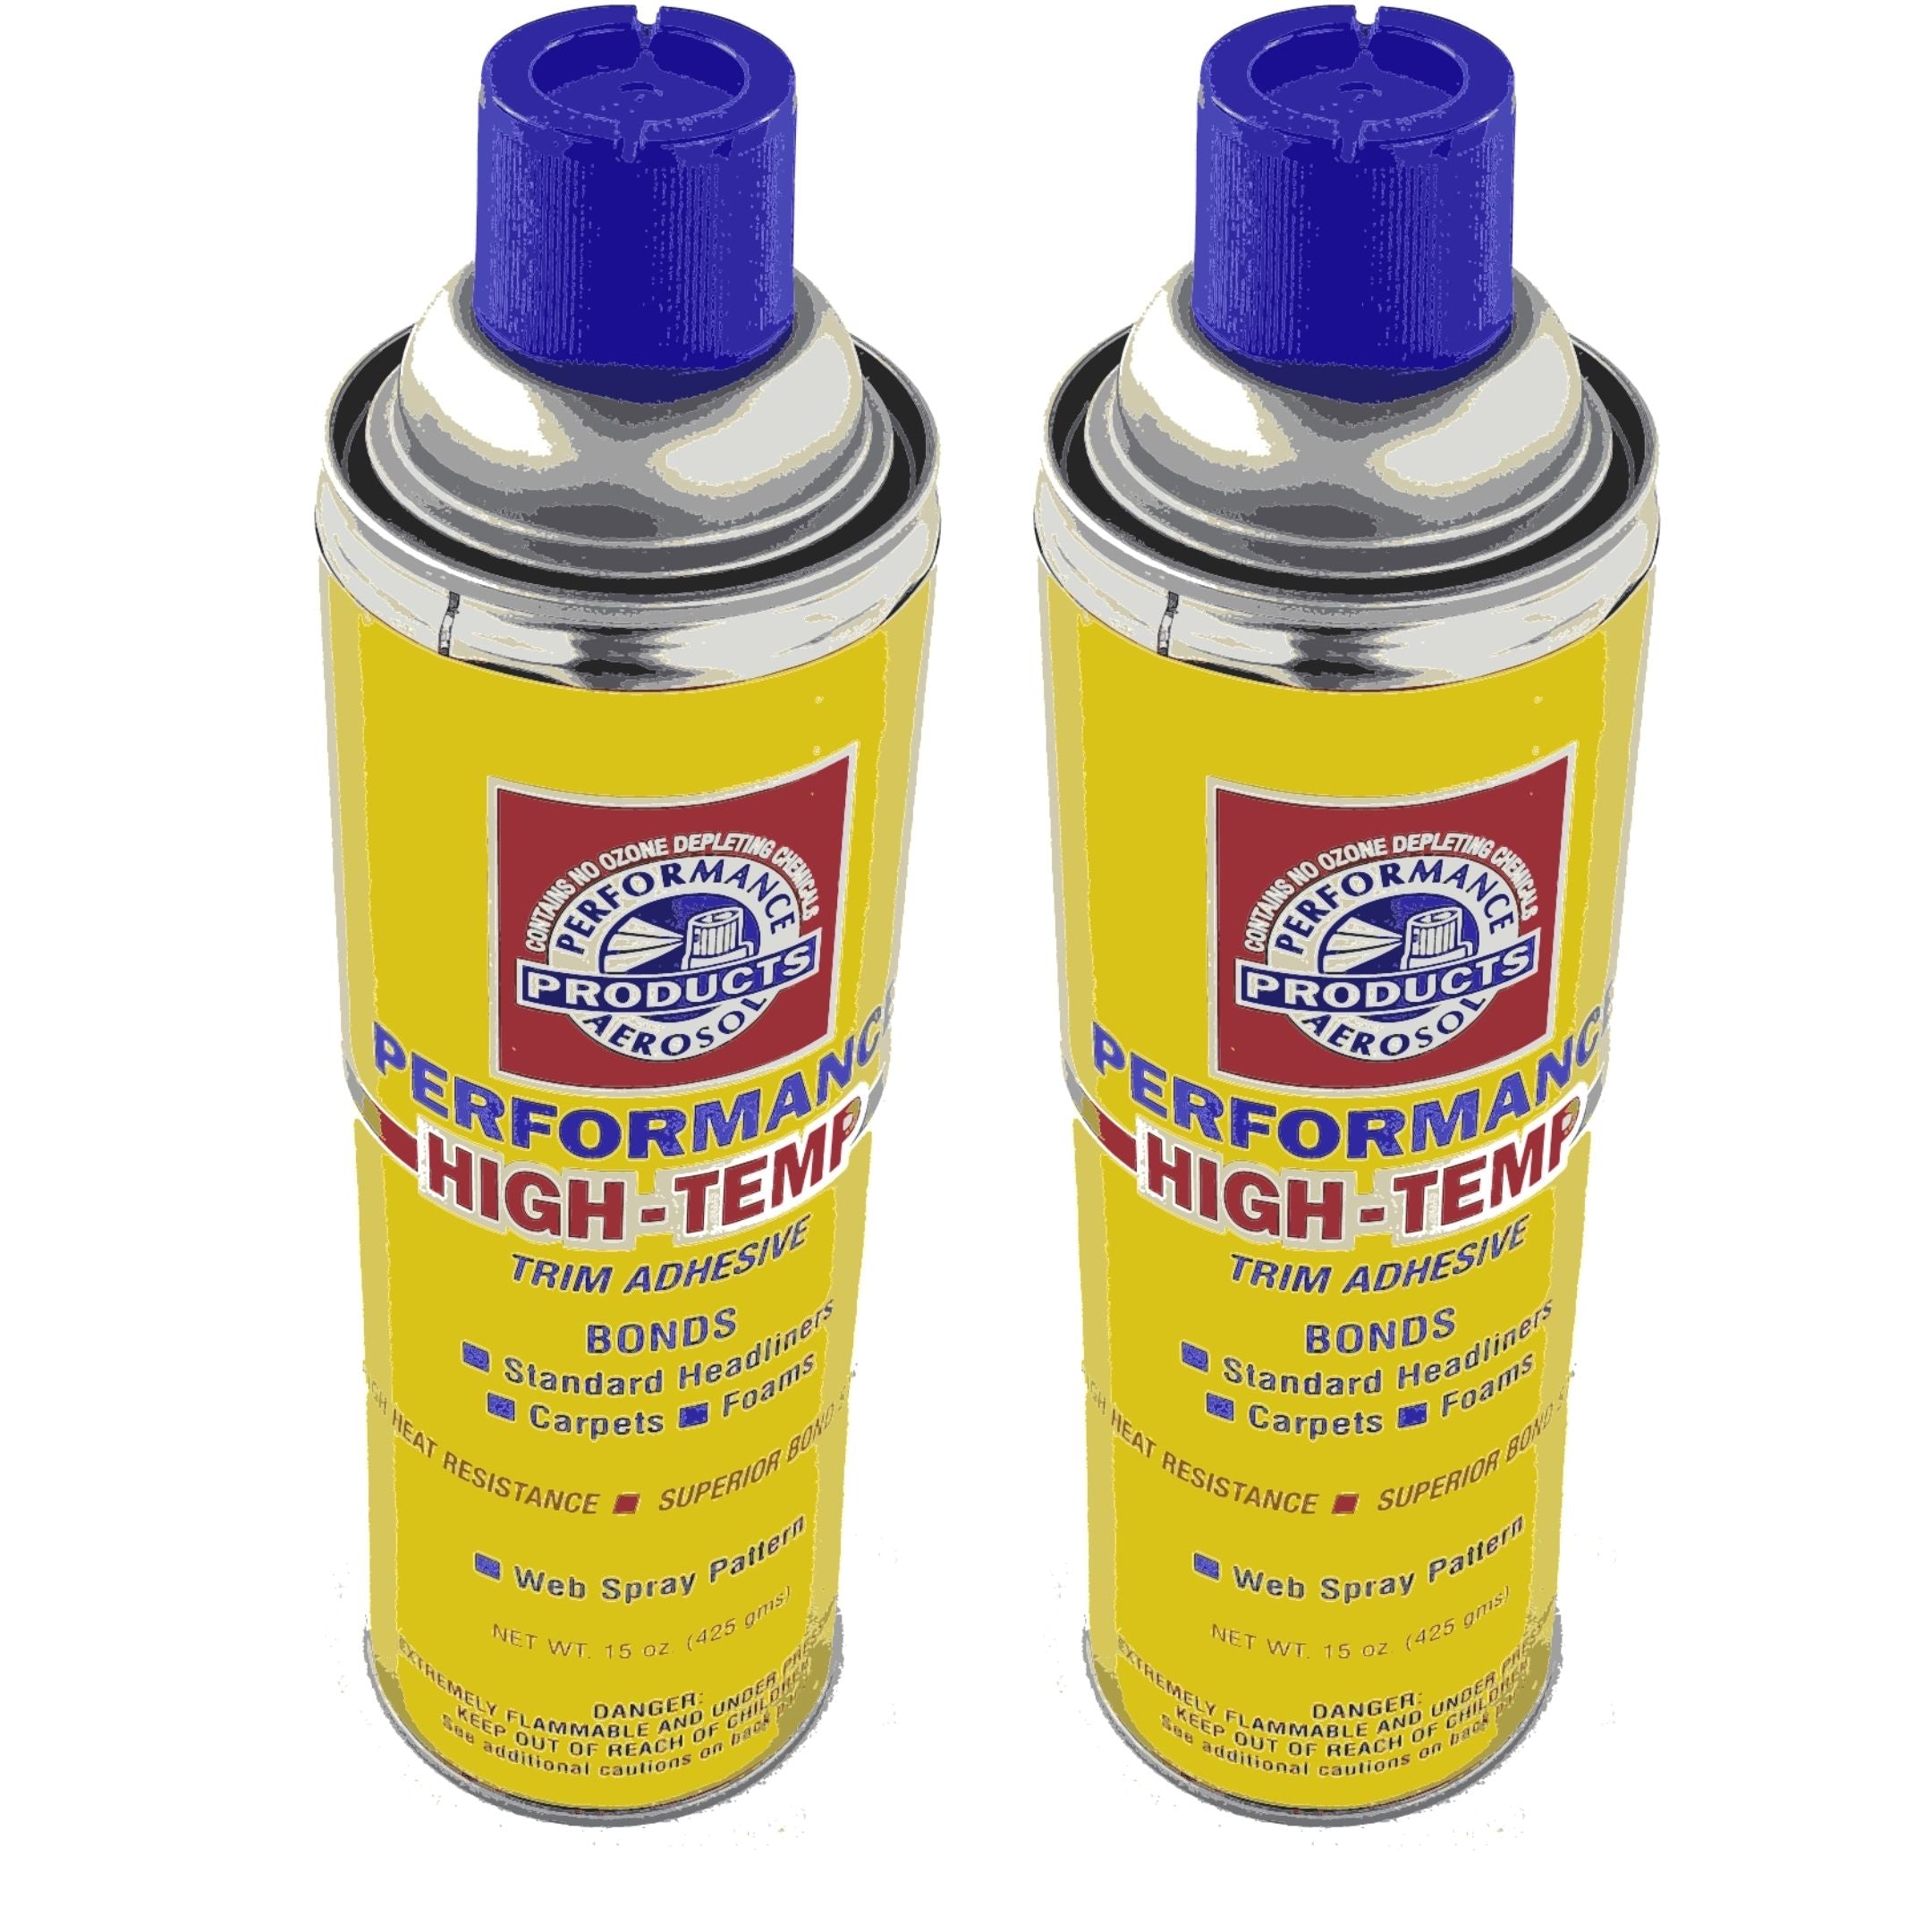 Spray Glue Adhesive Performance High Temp 12 oz Cans of Headliners - Qty 1